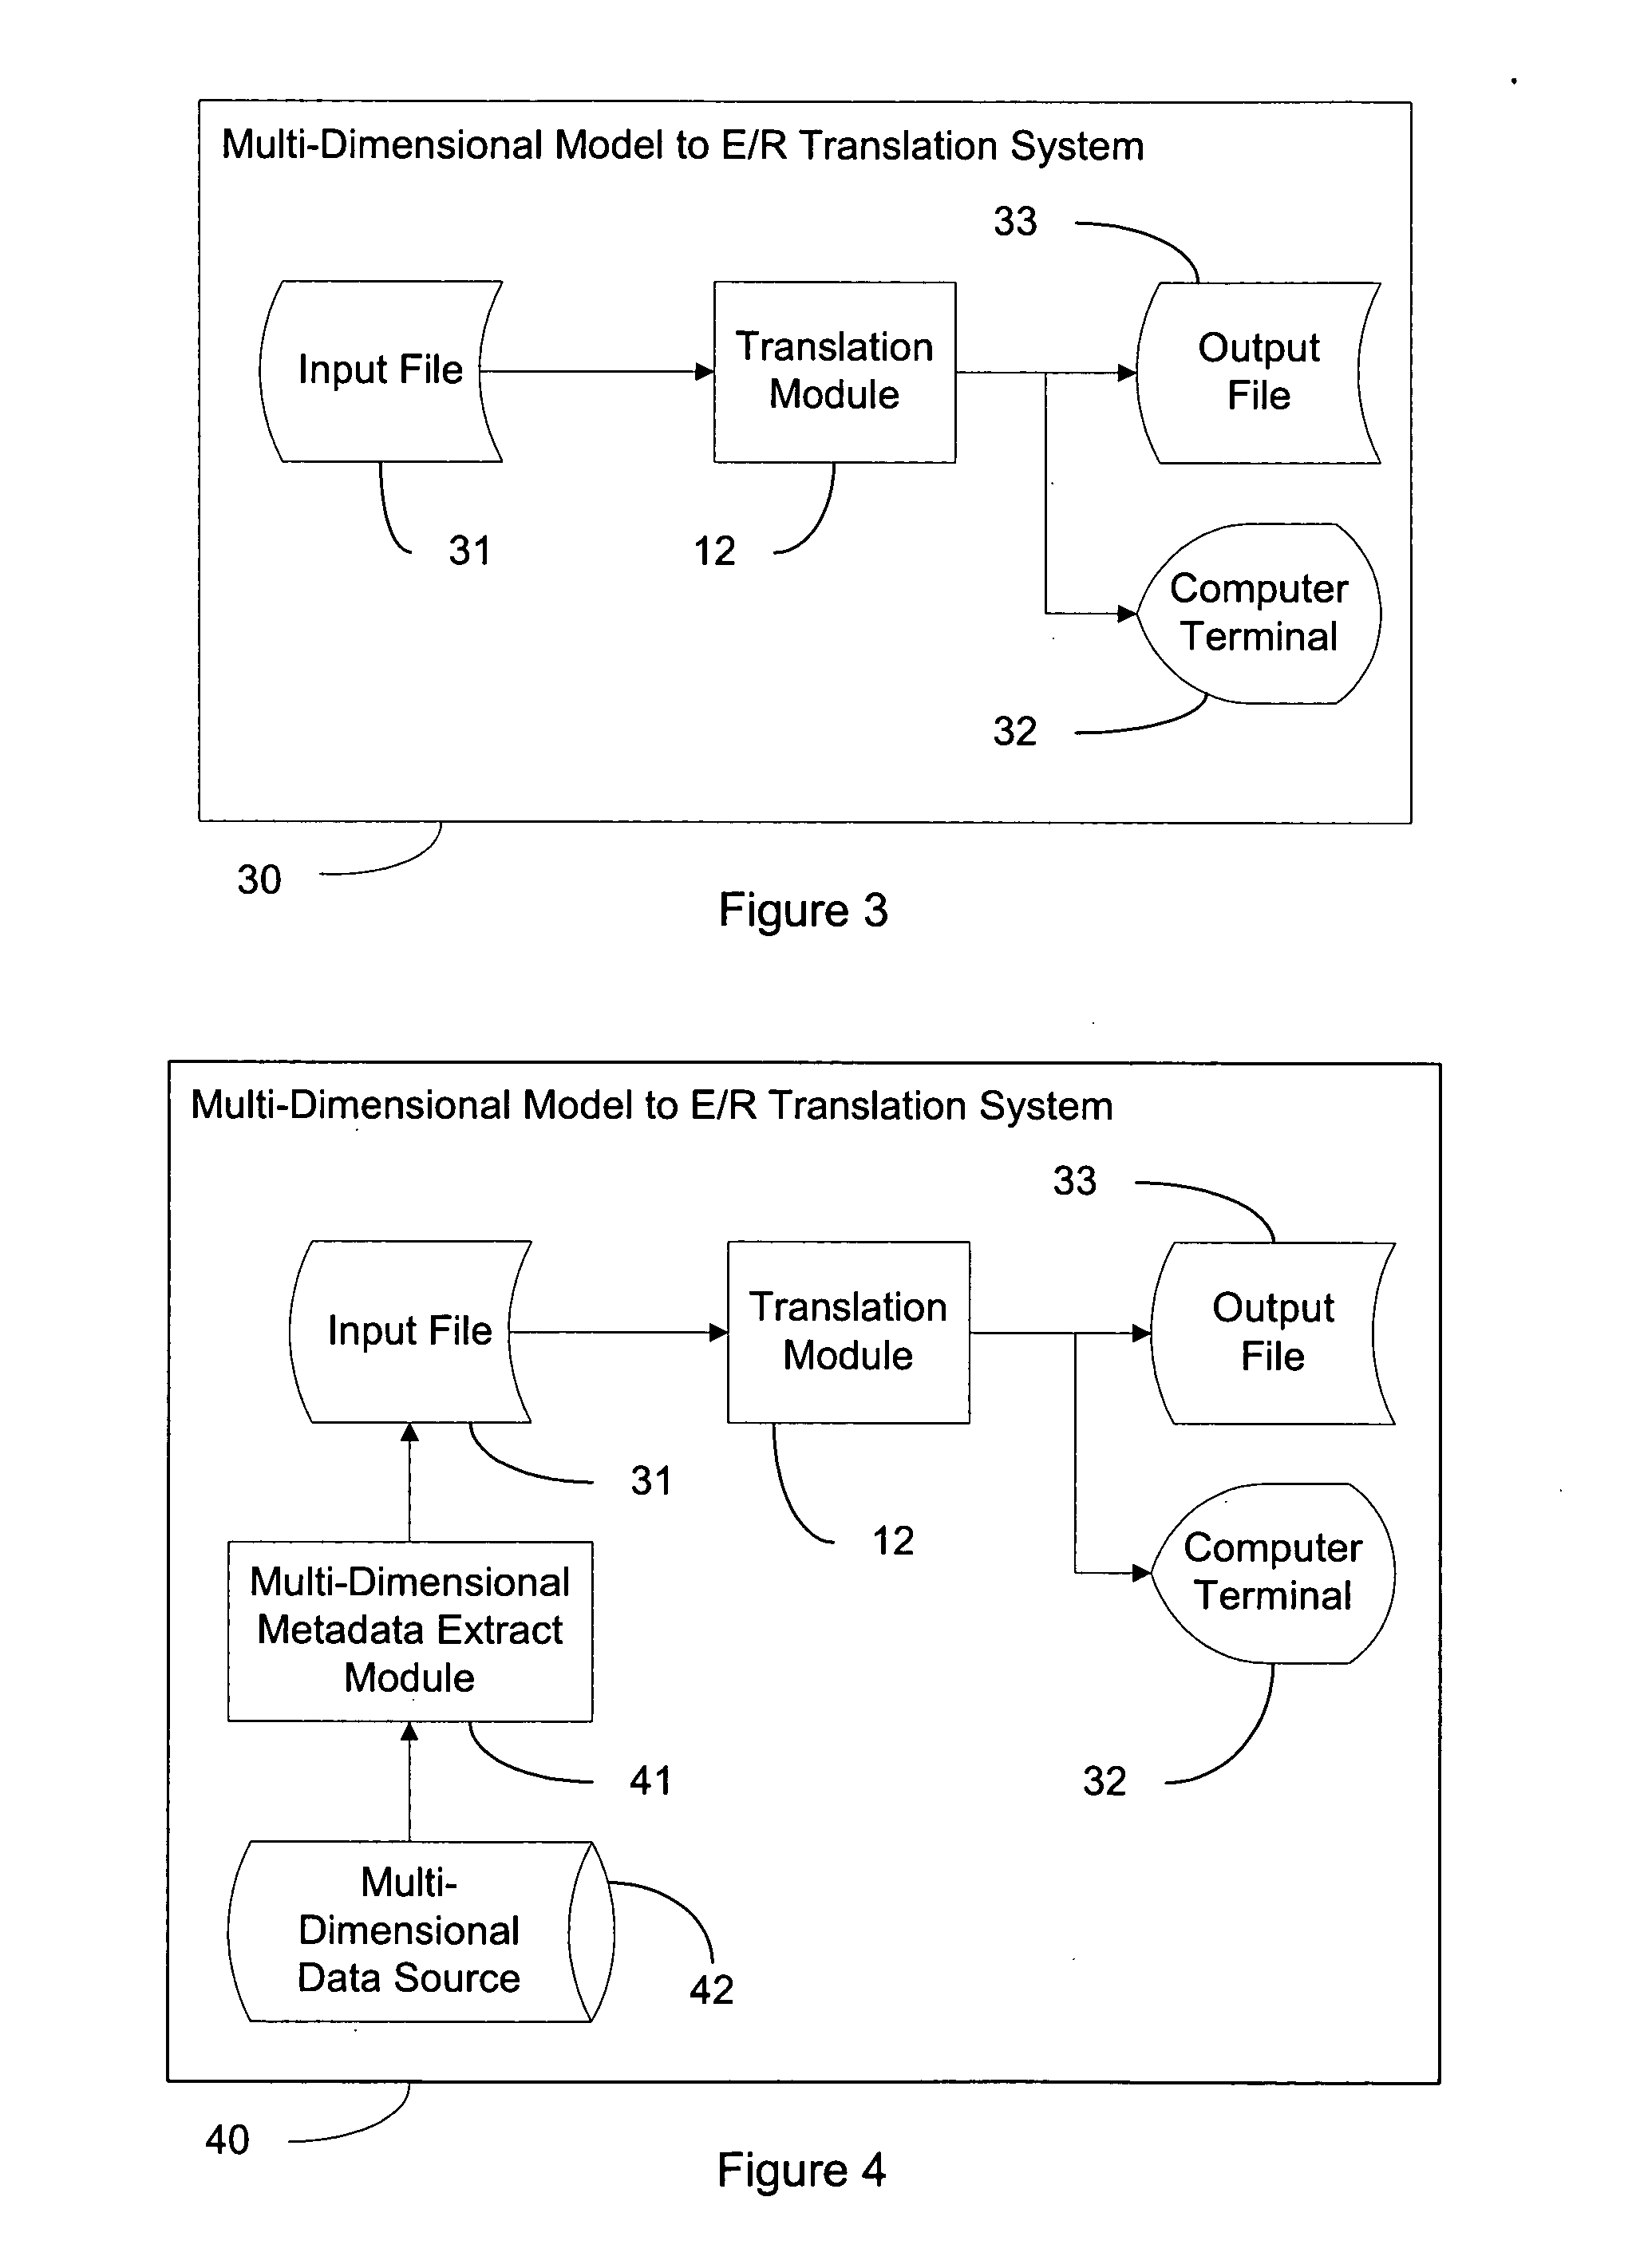 System and method of modelling of a multi-dimensional data source in an entity-relationship model